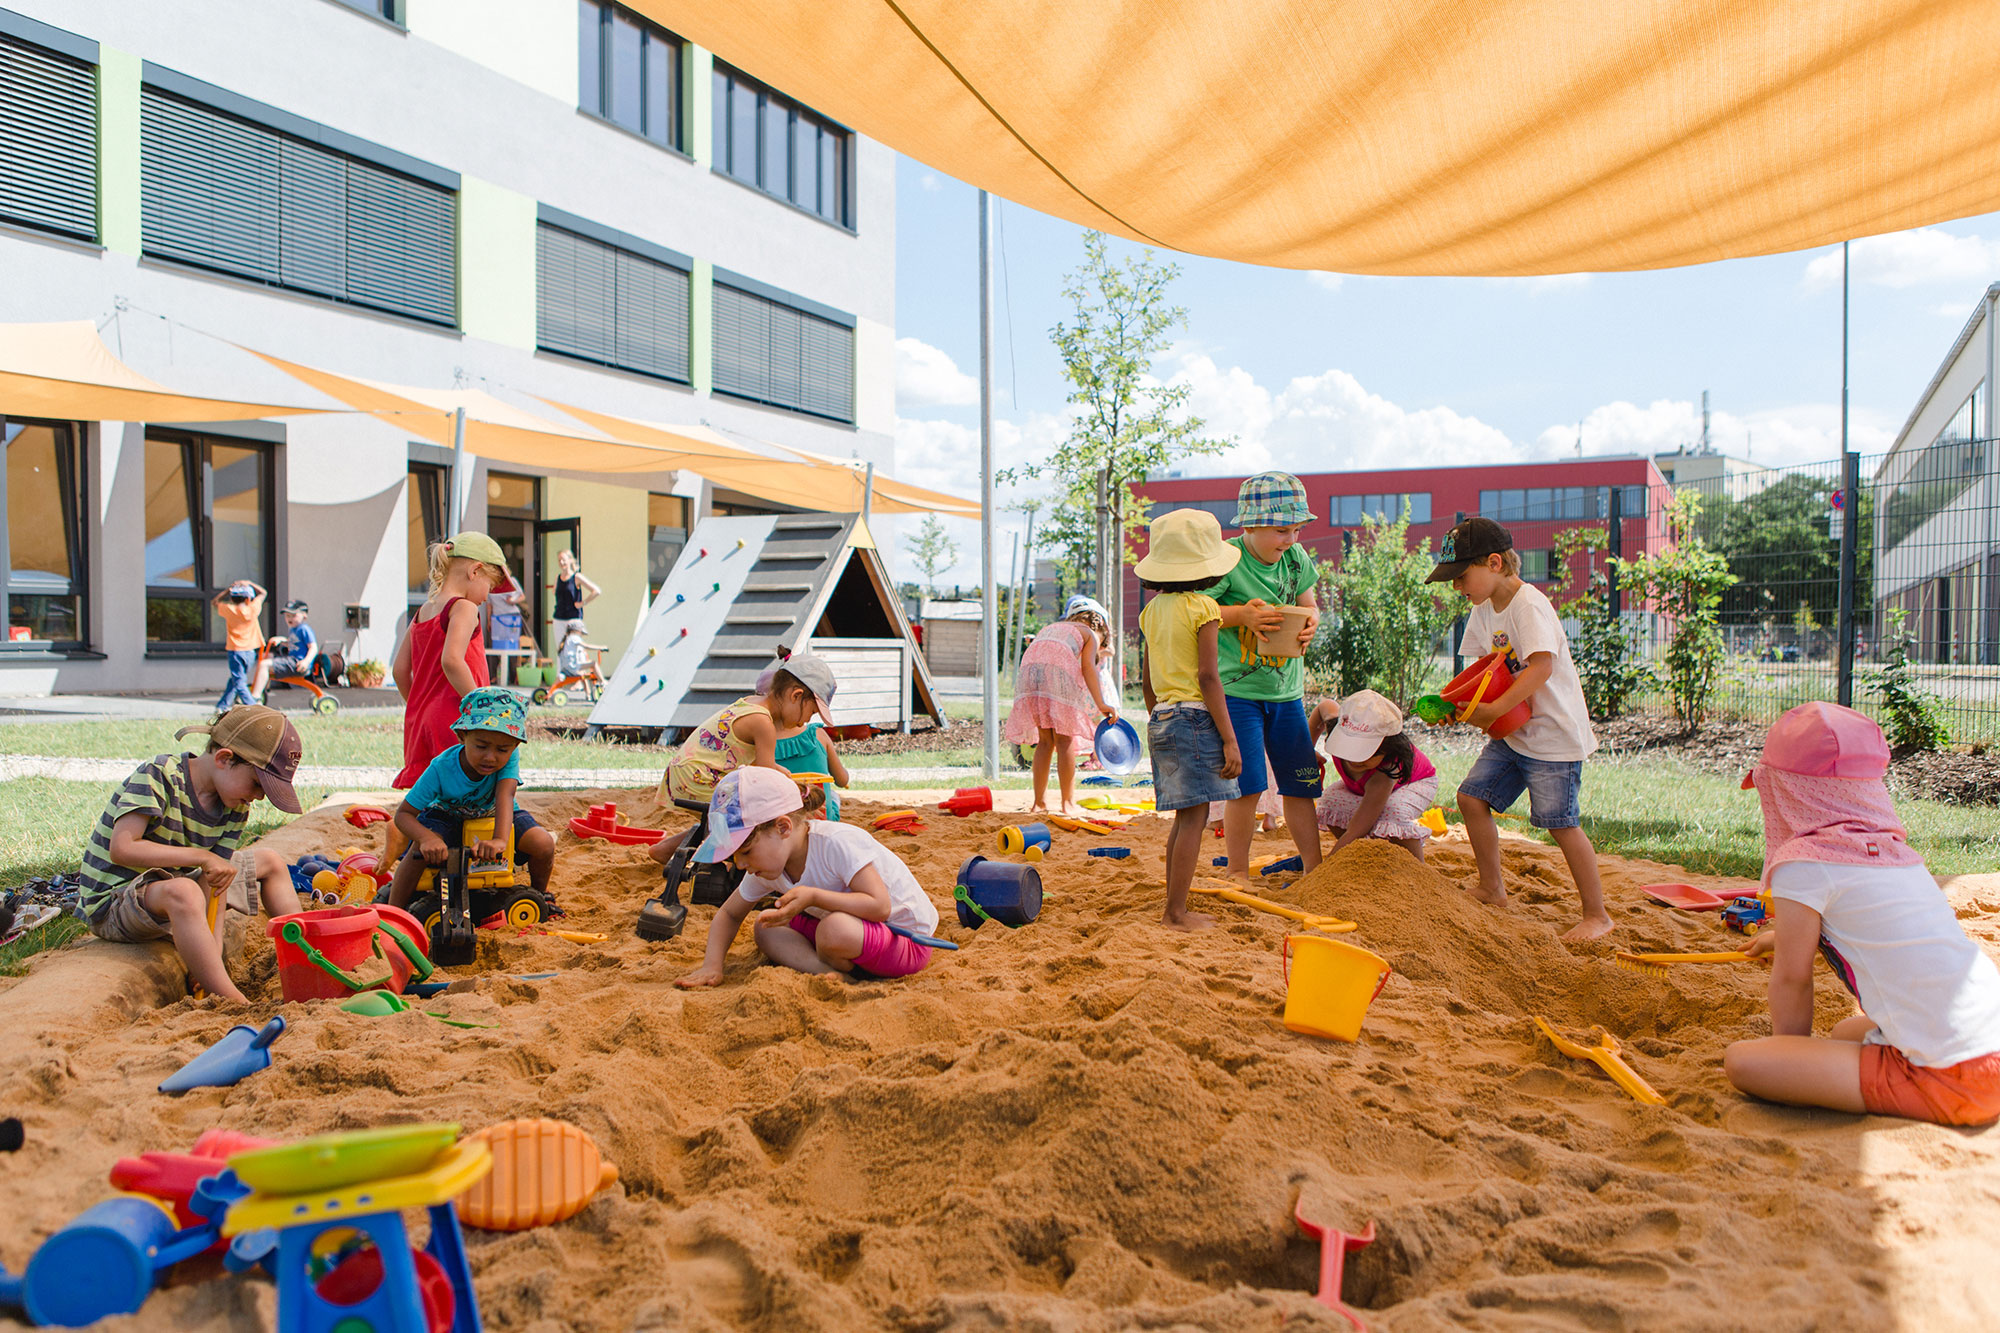 A group of kindergarten children play in the sandbox with sand toys. The sandbox is shaded by a yellow awning.